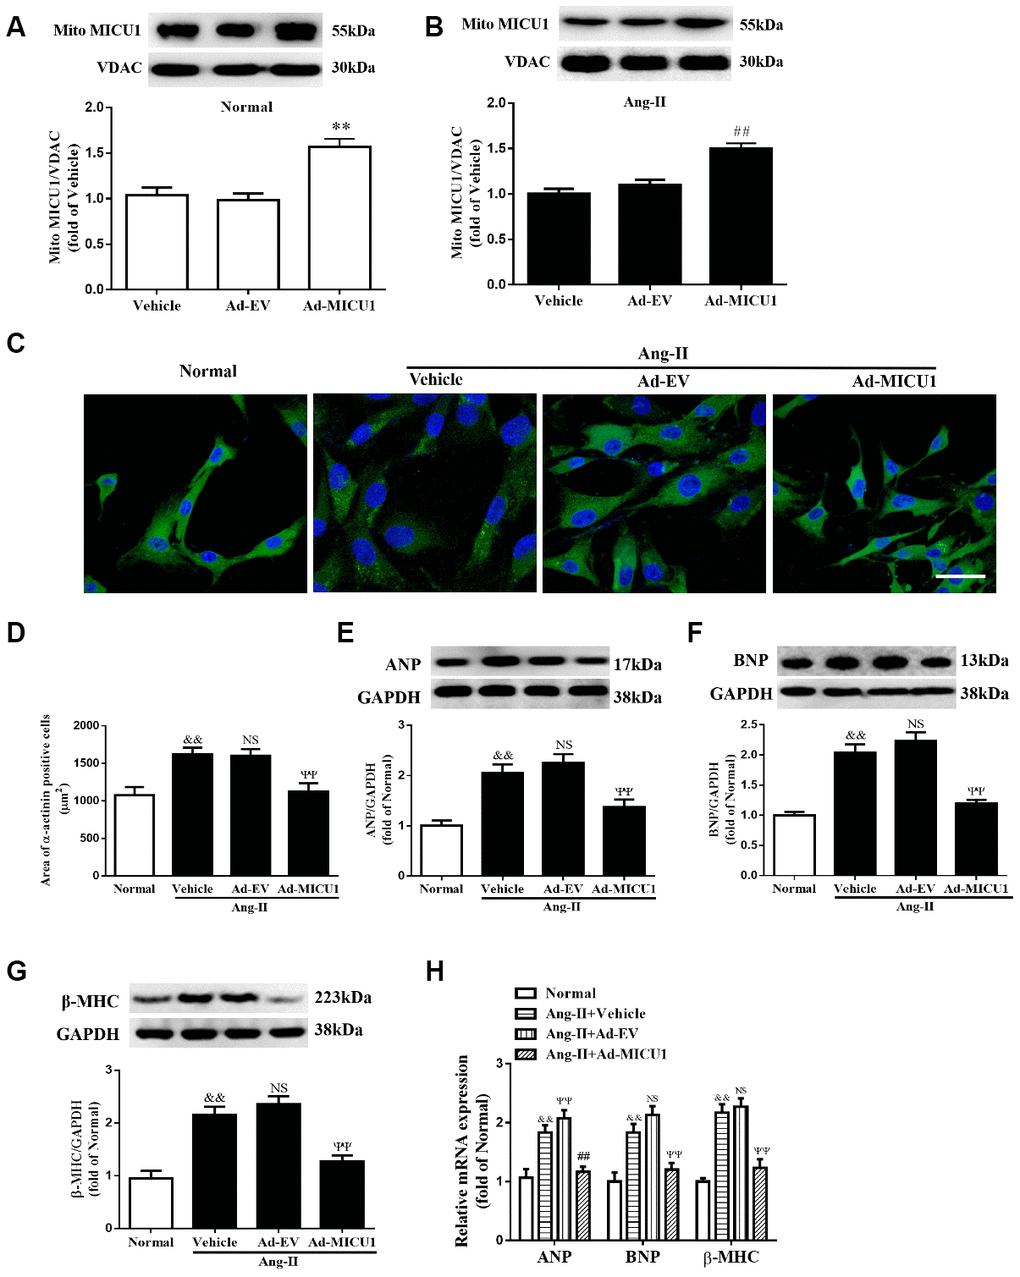 Adenoviral overexpression of MICU1 was resistant to cardiomyocyte hypertrophy in vitro. (A, B) Representative immunoblots and quantification of protein levels of MICU1 in (NMVMs) (A) and Ang-II treated NMVMs (B) infected with Ad-EV and Ad-MICU1 were shown. (C, D) Cell surface areas were measured in NMVMs stimulated with Ang-II (C) and representative images of α-actinin (red)-and DAPI (blue)-stained cardiomyocytes (left) were followed by cell area quantifications (D). Scale bars=10 μm. (E–H) Western blotting and qRT-PCR were used to measure protein levels of ANP, BNP and β-MHC in NMVMs and Ang-II treated NMVMs. All the data represent the means ± SEM. N=6-8/group. **P##P&&PΨΨP